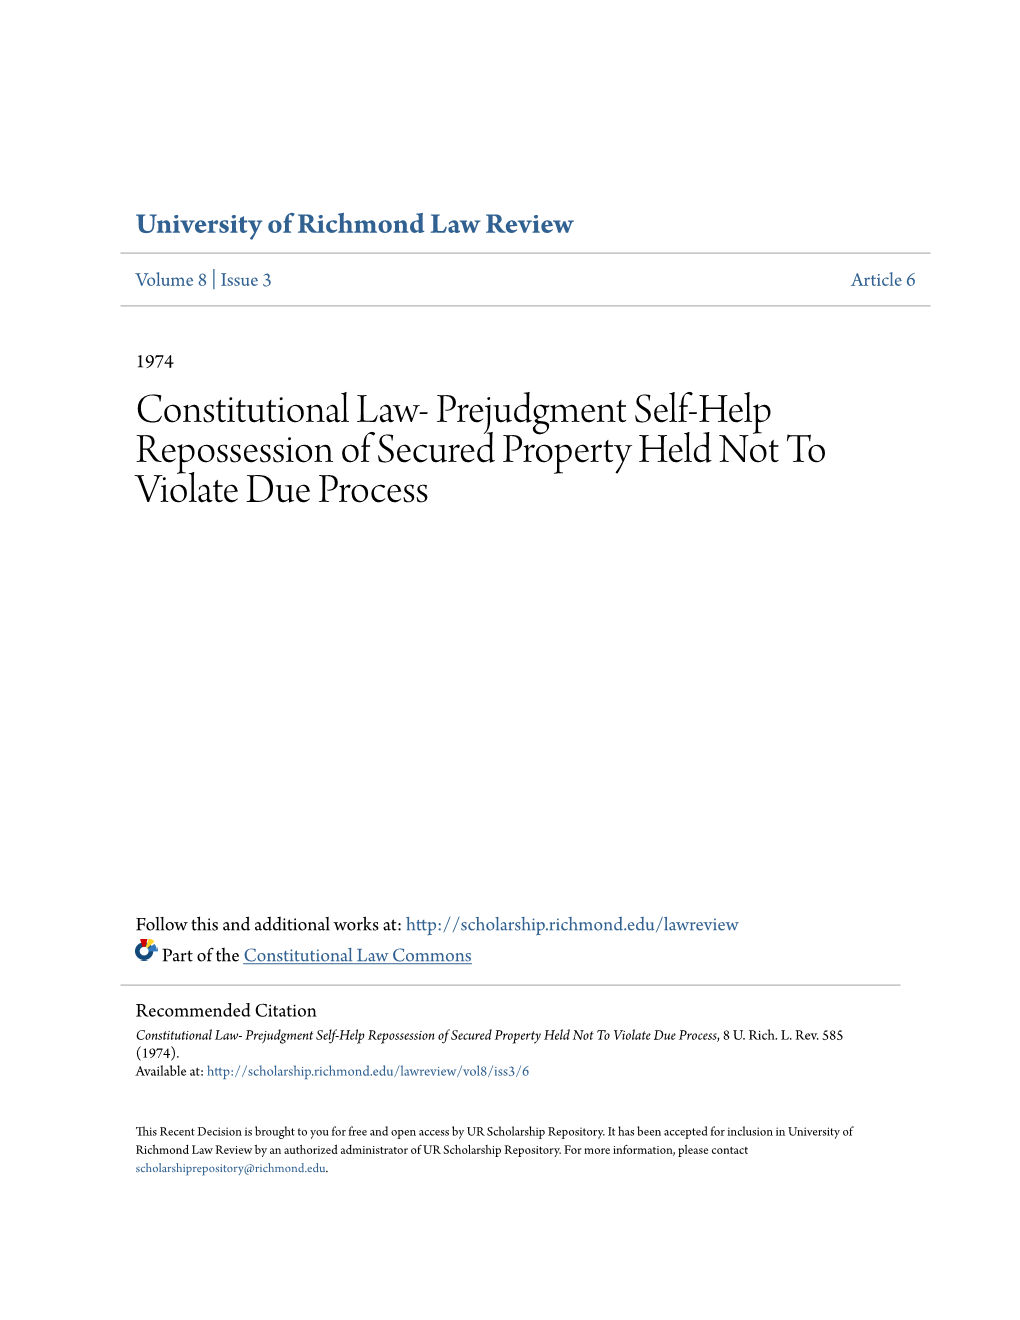 Constitutional Law- Prejudgment Self-Help Repossession of Secured Property Held Not to Violate Due Process